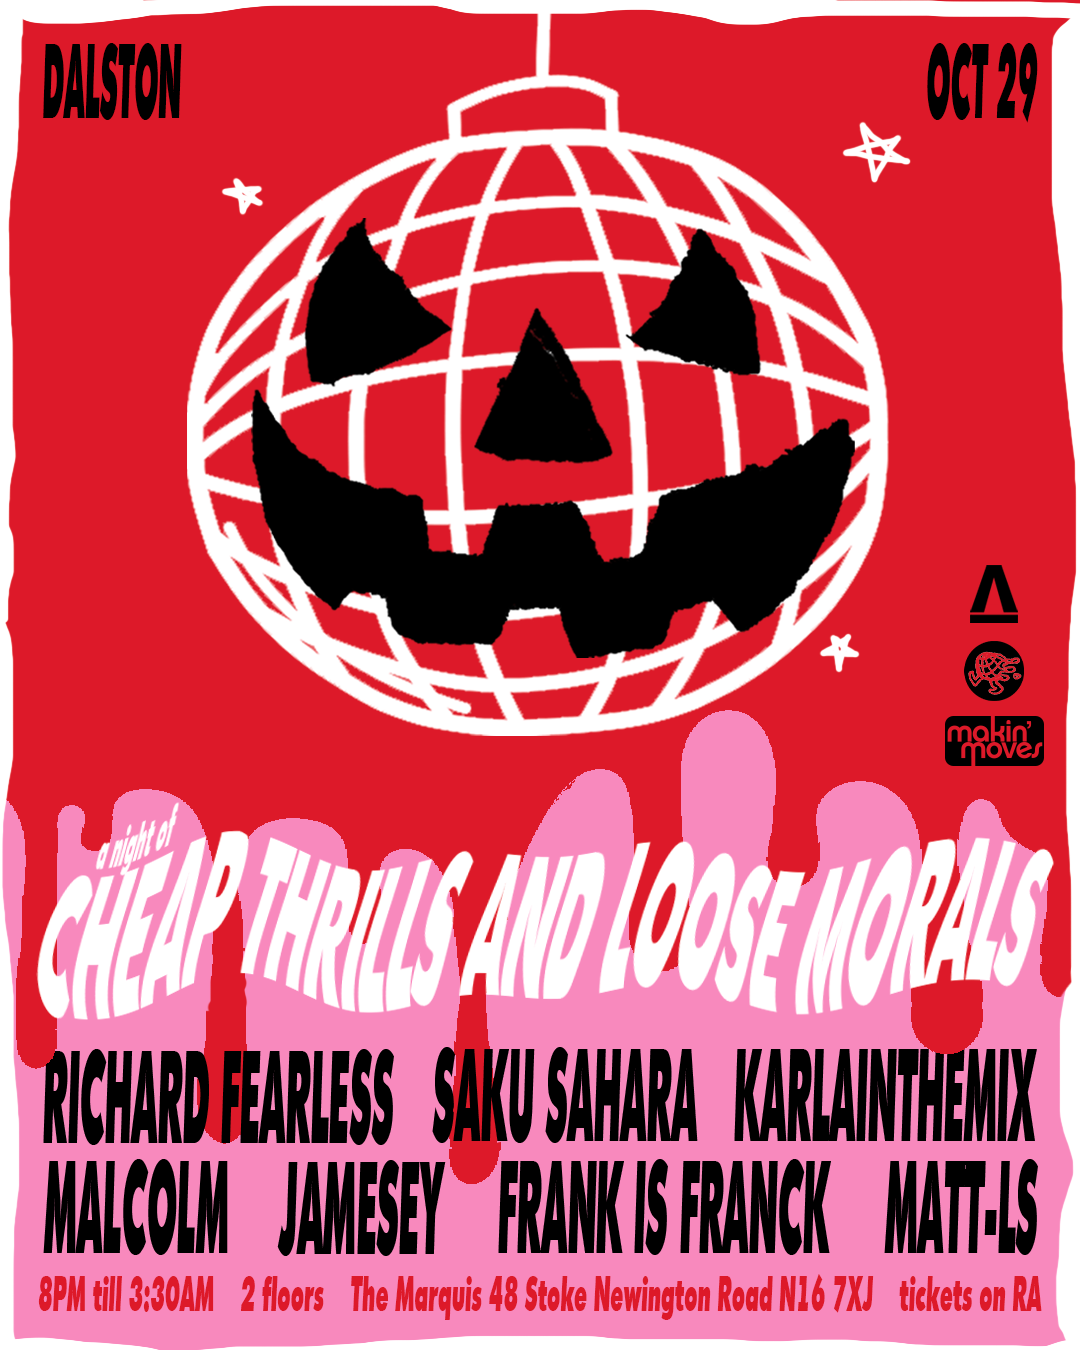 Makin' Moves x Shapes x Global Warming pres 'Cheap Thrills & Loose Morals' - フライヤー表